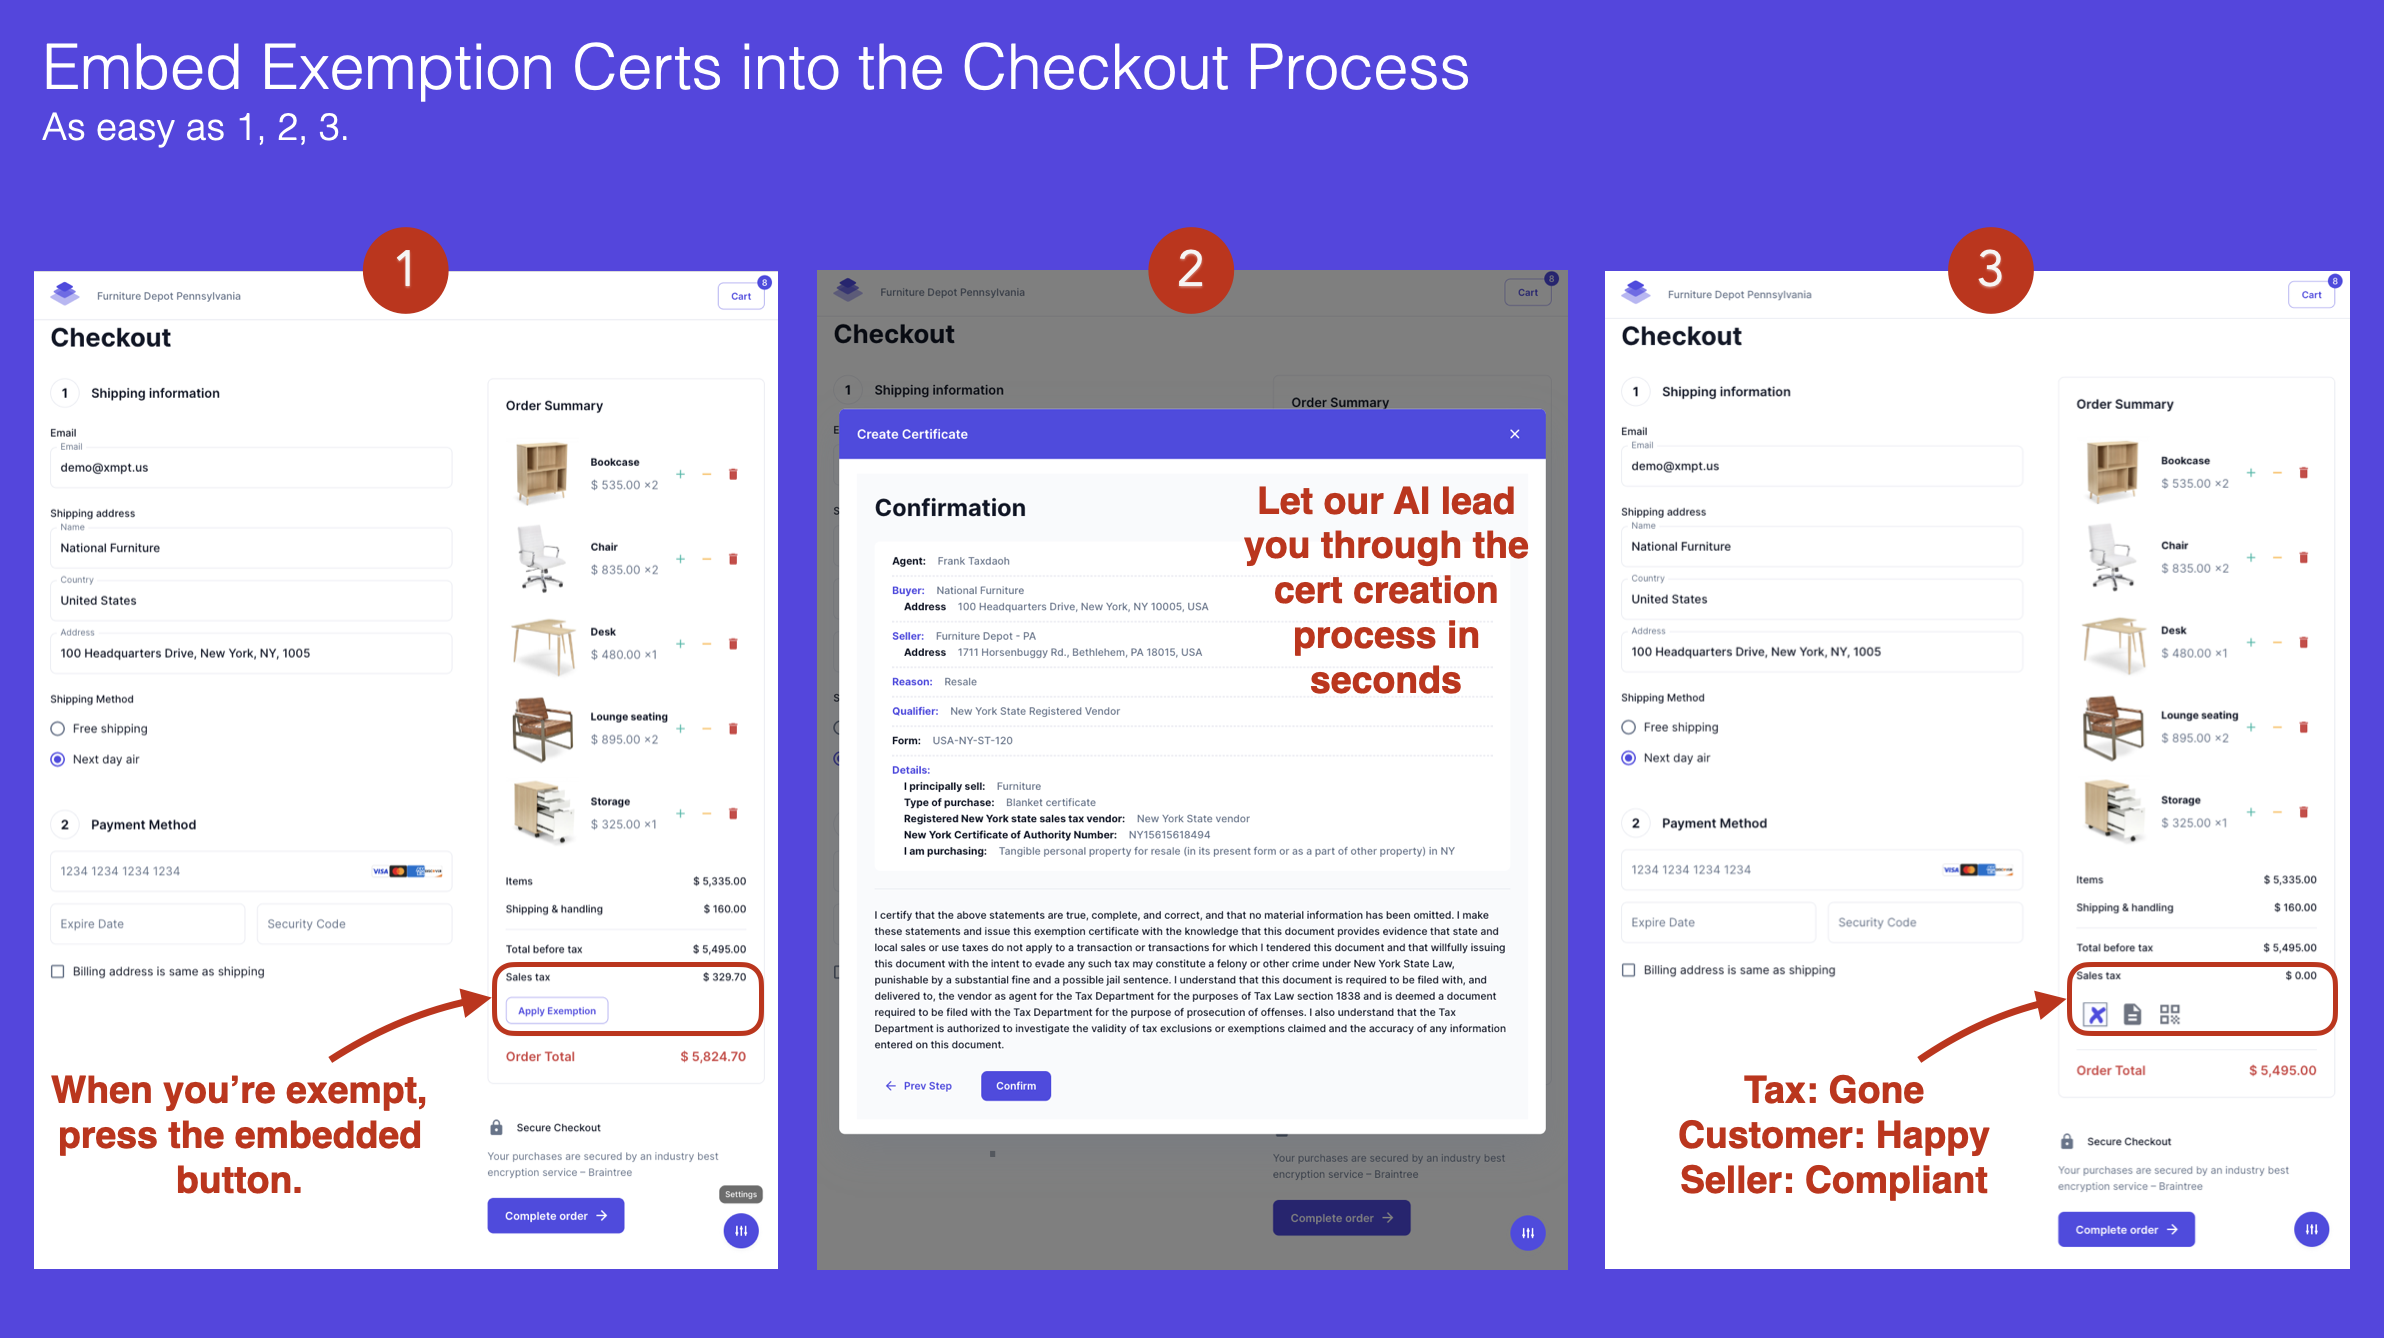 14 lines of code.  That's what it takes to embed our exemption certs into any checkout process.  Stop managing certs by hand, and automate with XMPT!